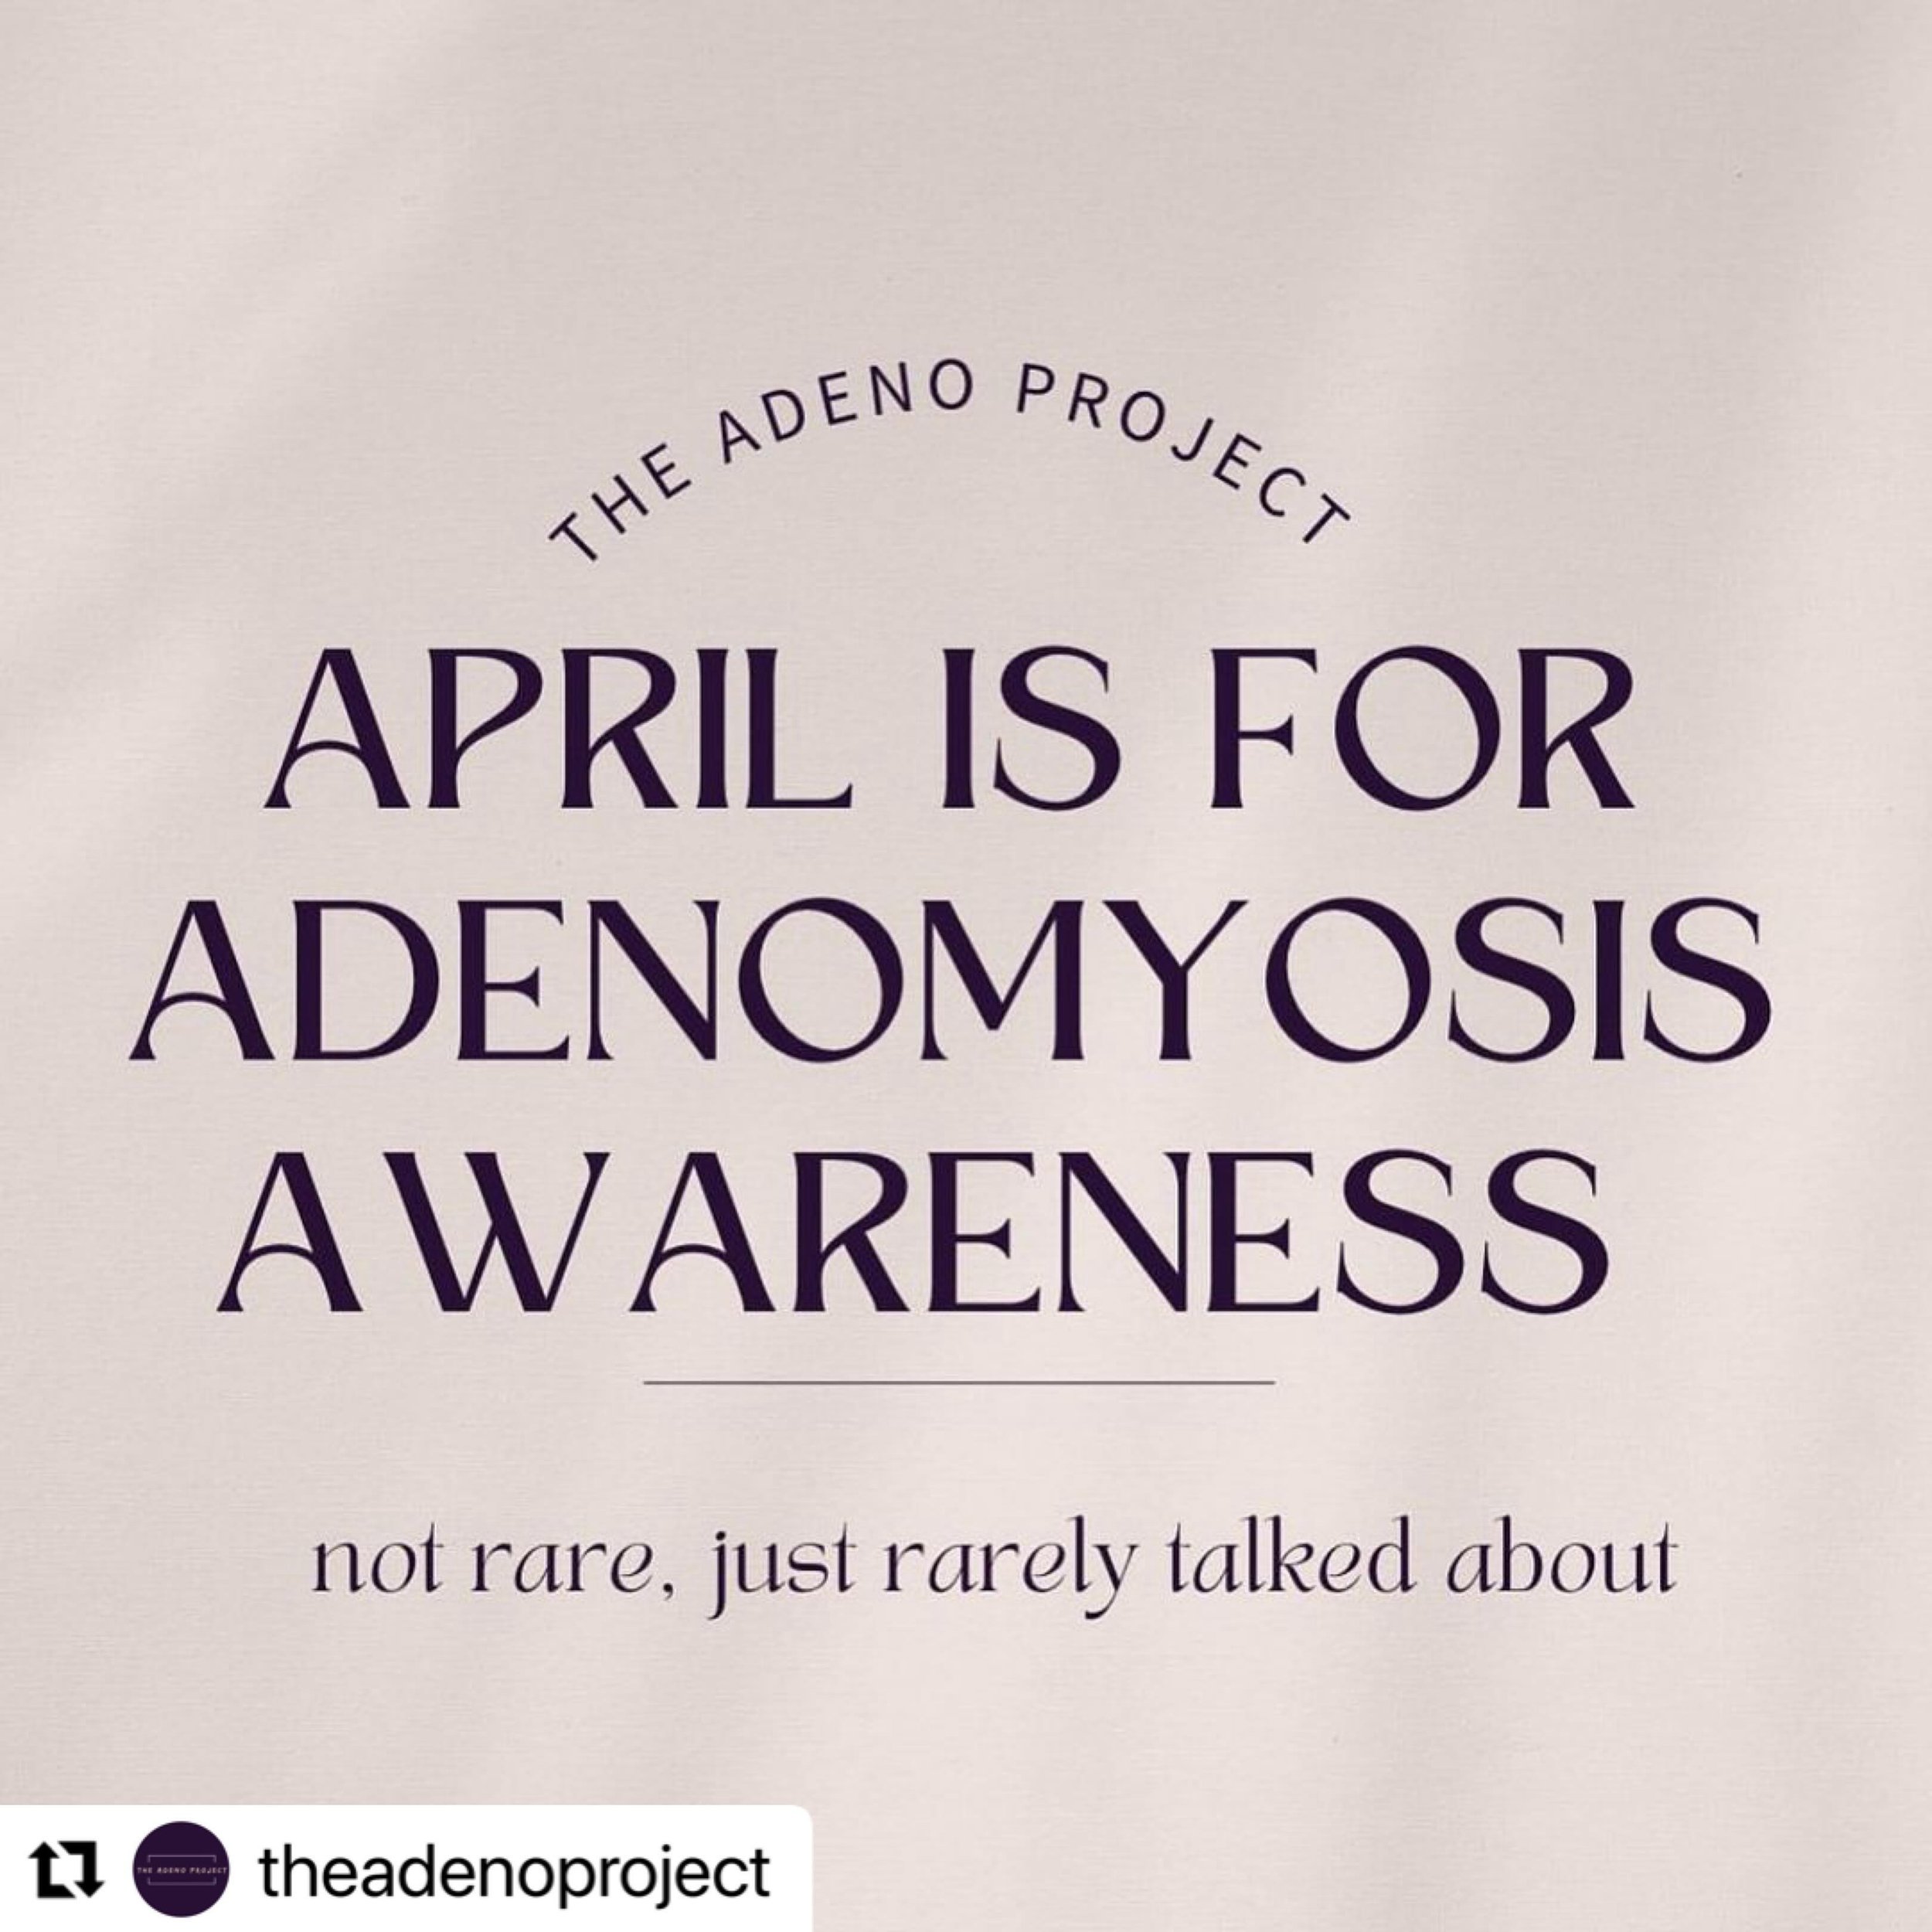 #Repost @theadenoproject with @use.repost

For more information on symptoms, evaluation and treatment of adenomyosis, head to the Center for Endo Care for resources and support. You&rsquo;re not alone with this debilitating illness. #adenomyosisaware